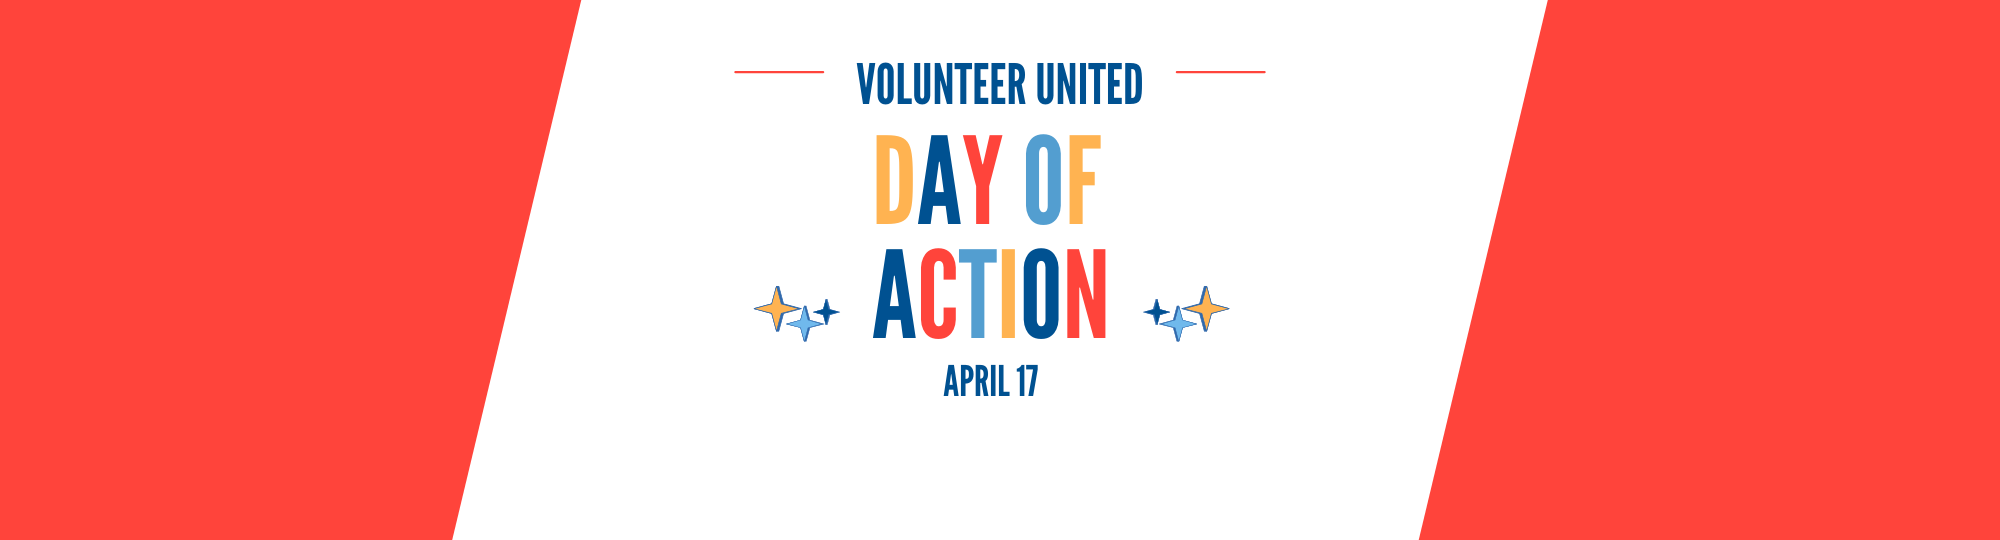 Volunteer United Day of Action